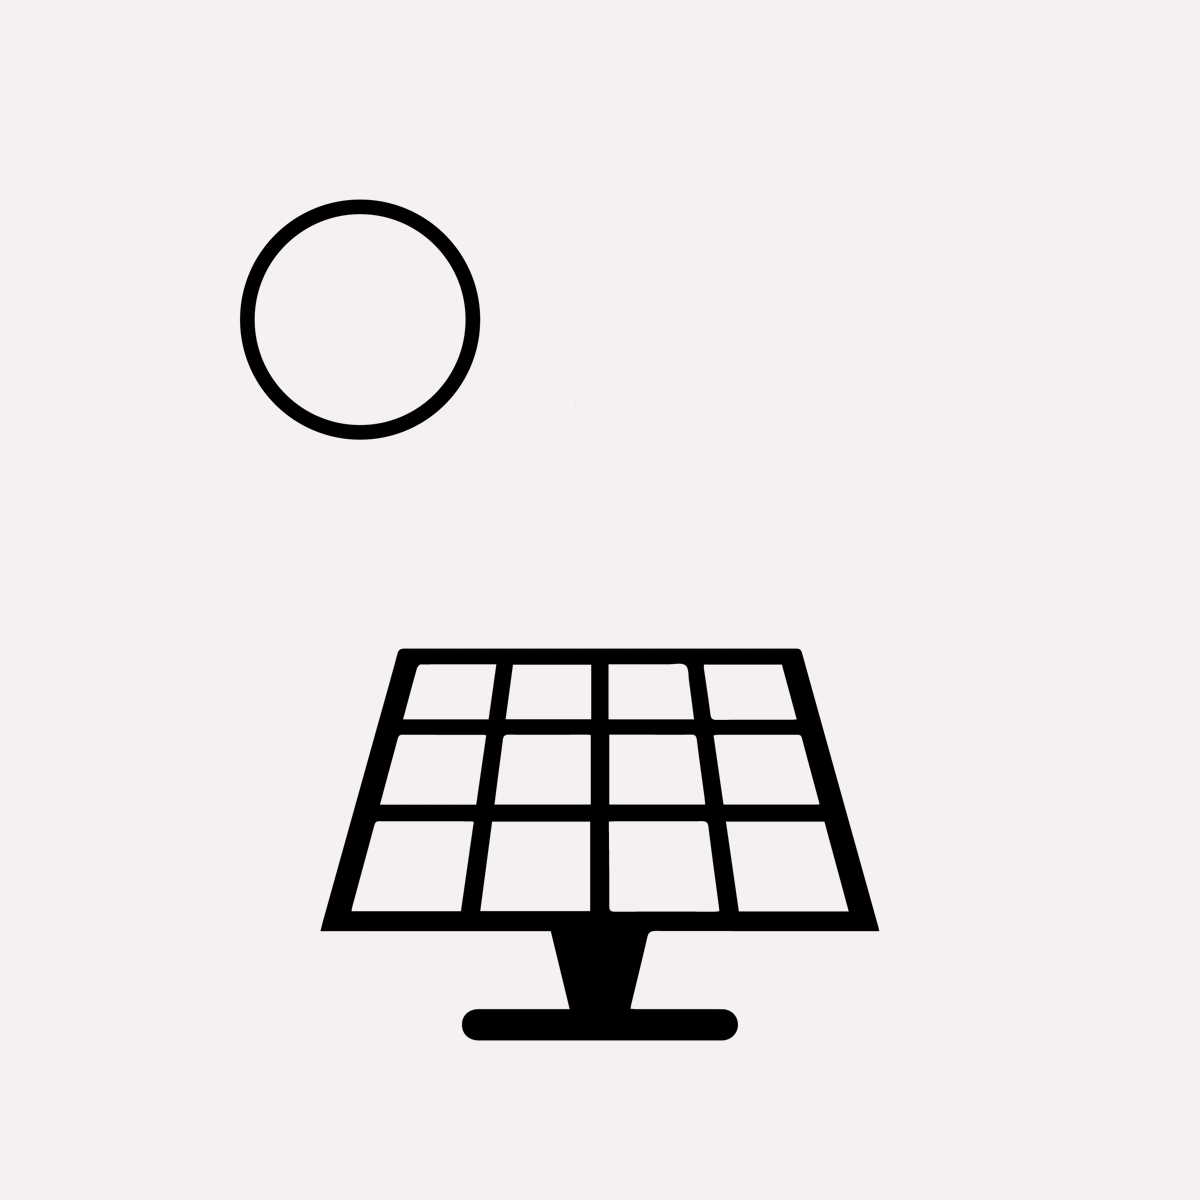 Pictured is drawn image of sun and solar panel